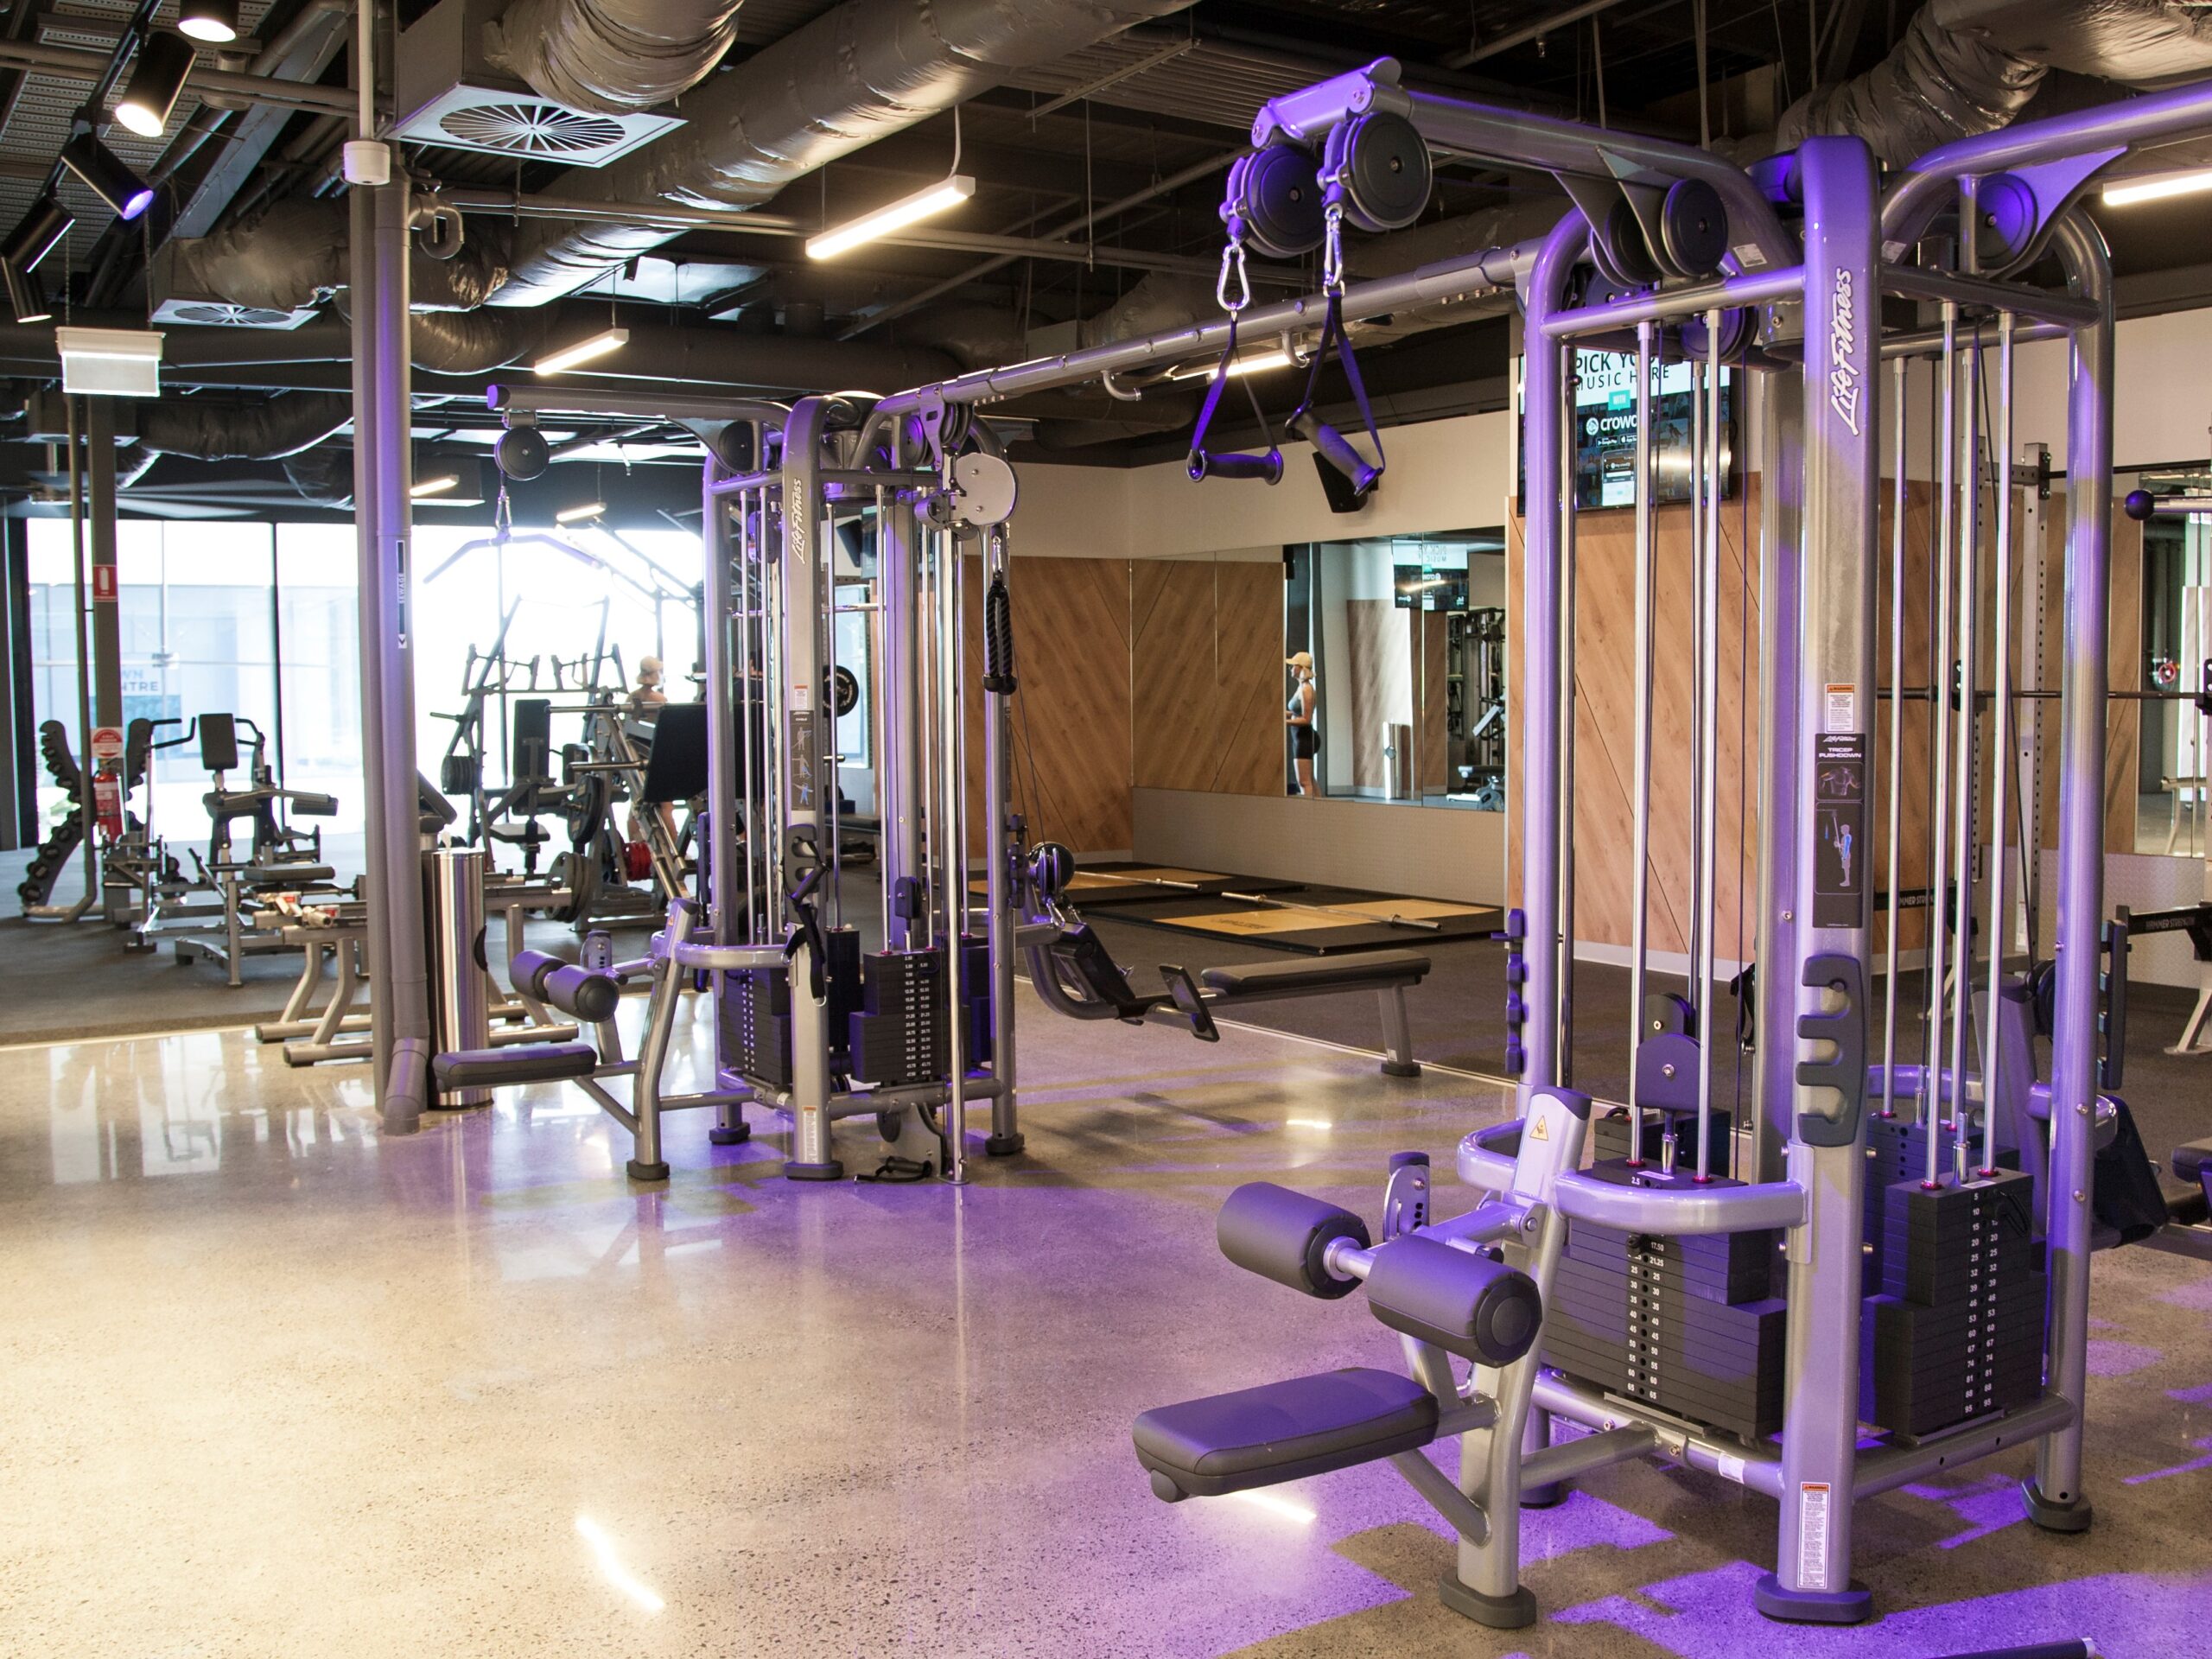 Anytime Fitness unveils fresh club design - Franchise Executives